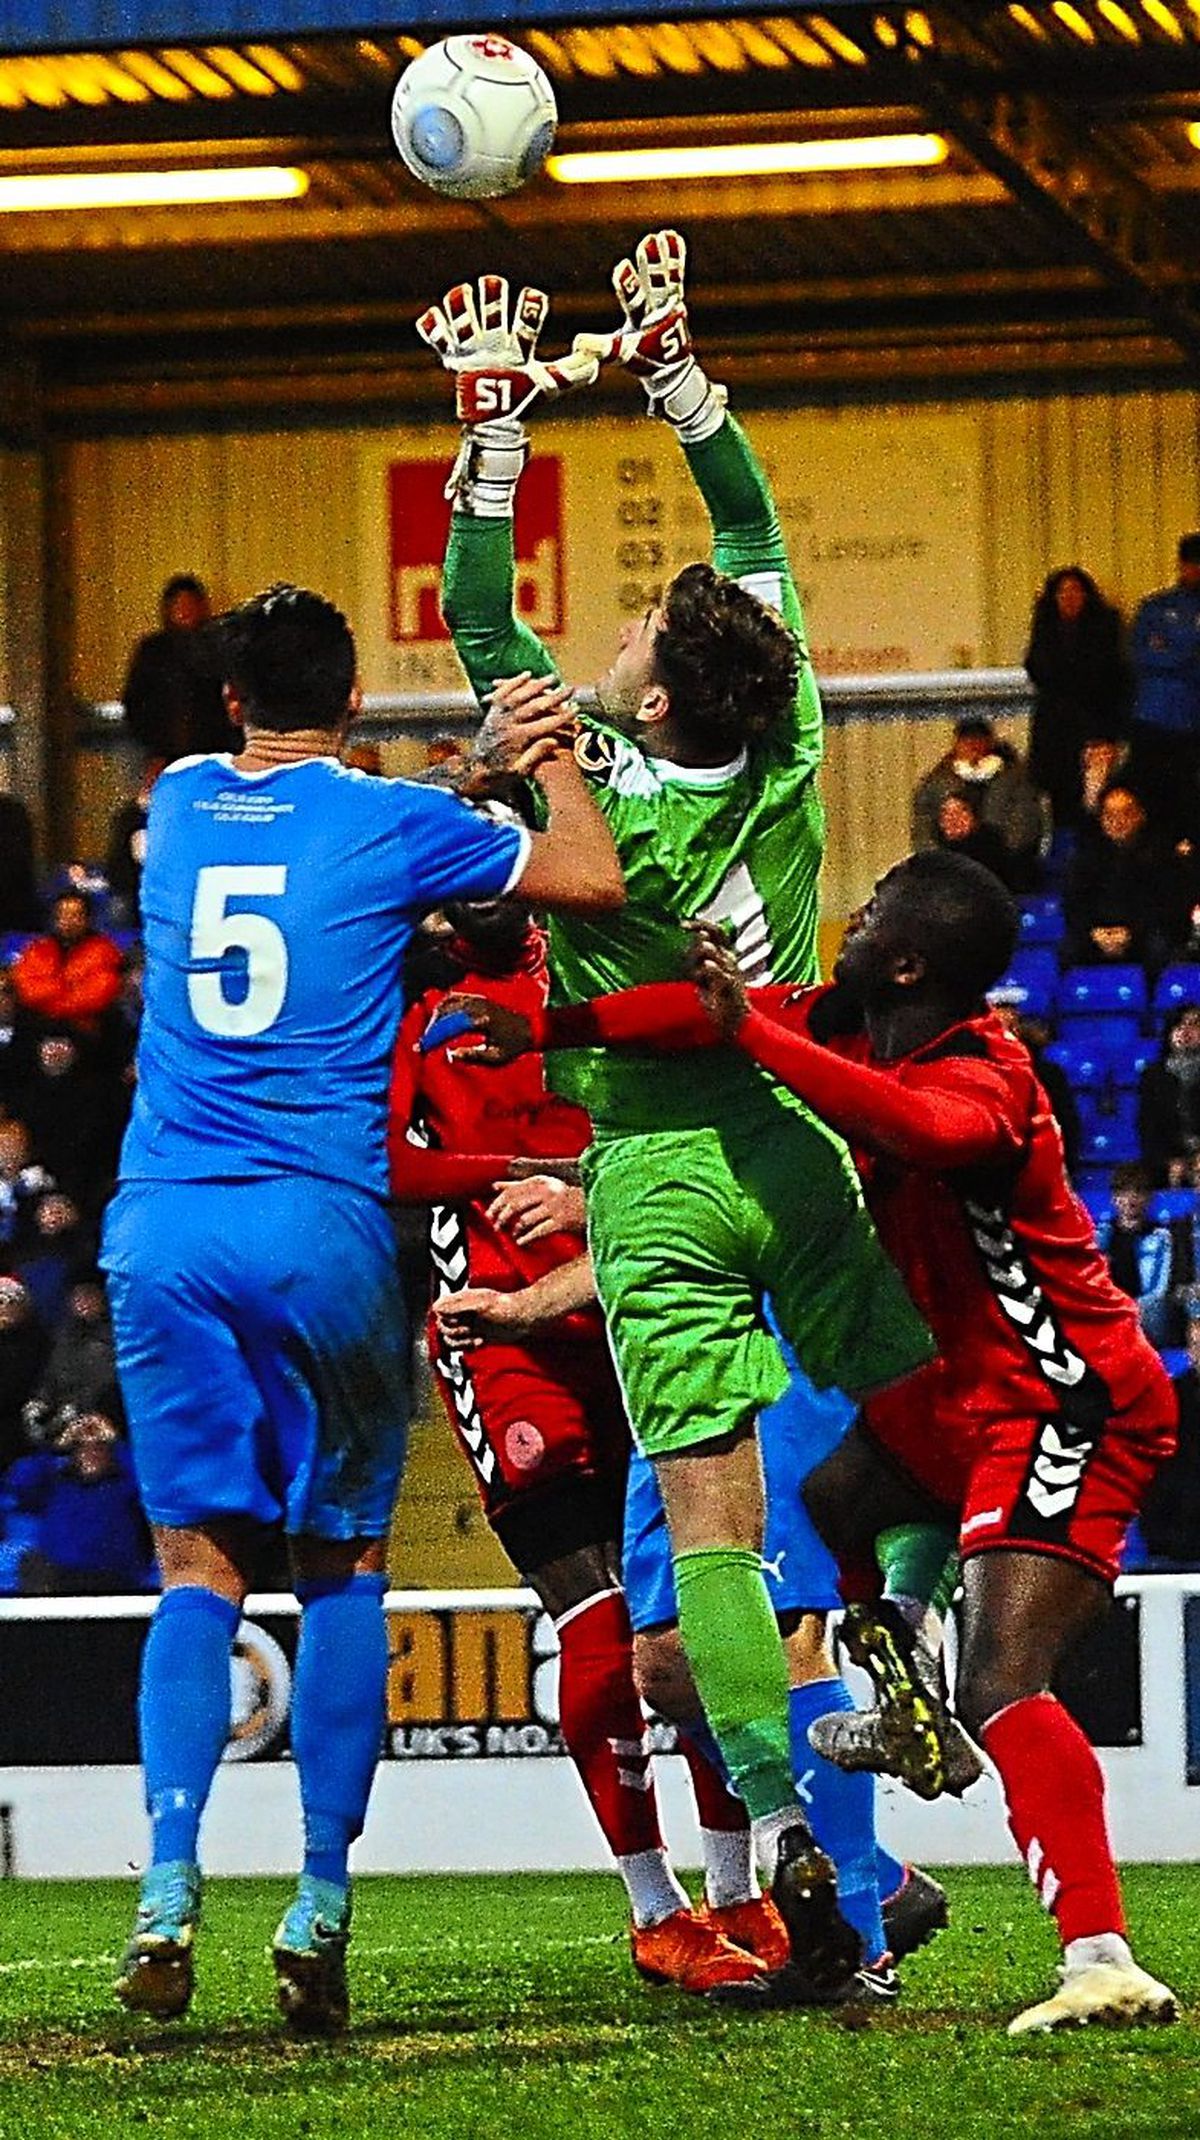 Disallowed goal - Grant Shenton of Chester is fouled prior to a disallowed equaliser.